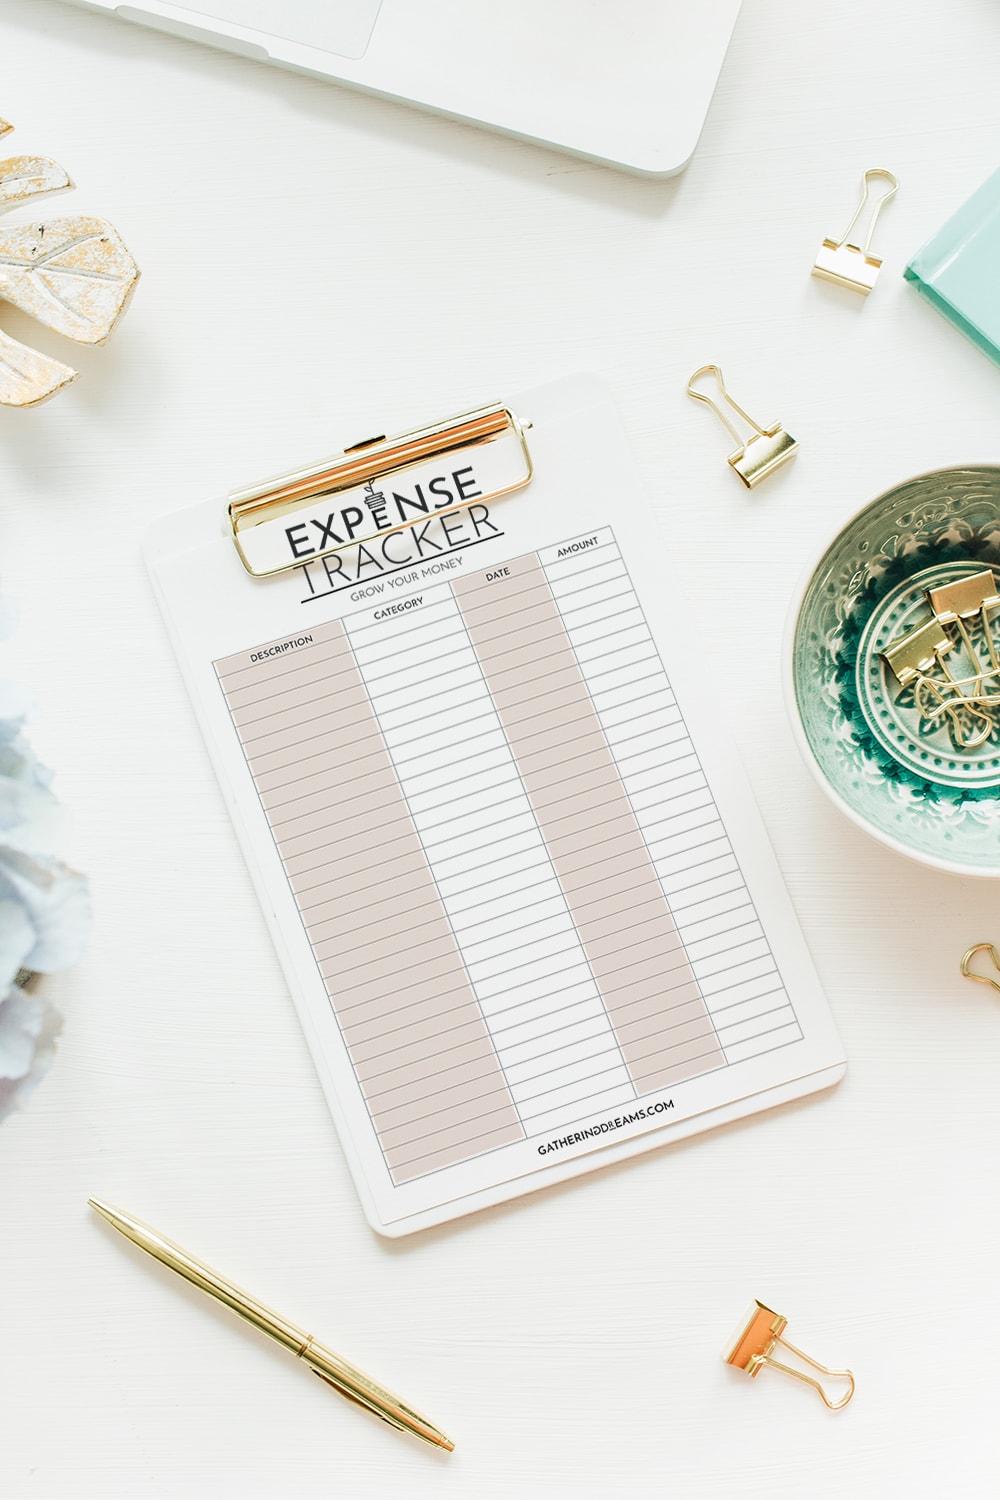 Top view of Expense tracker printable